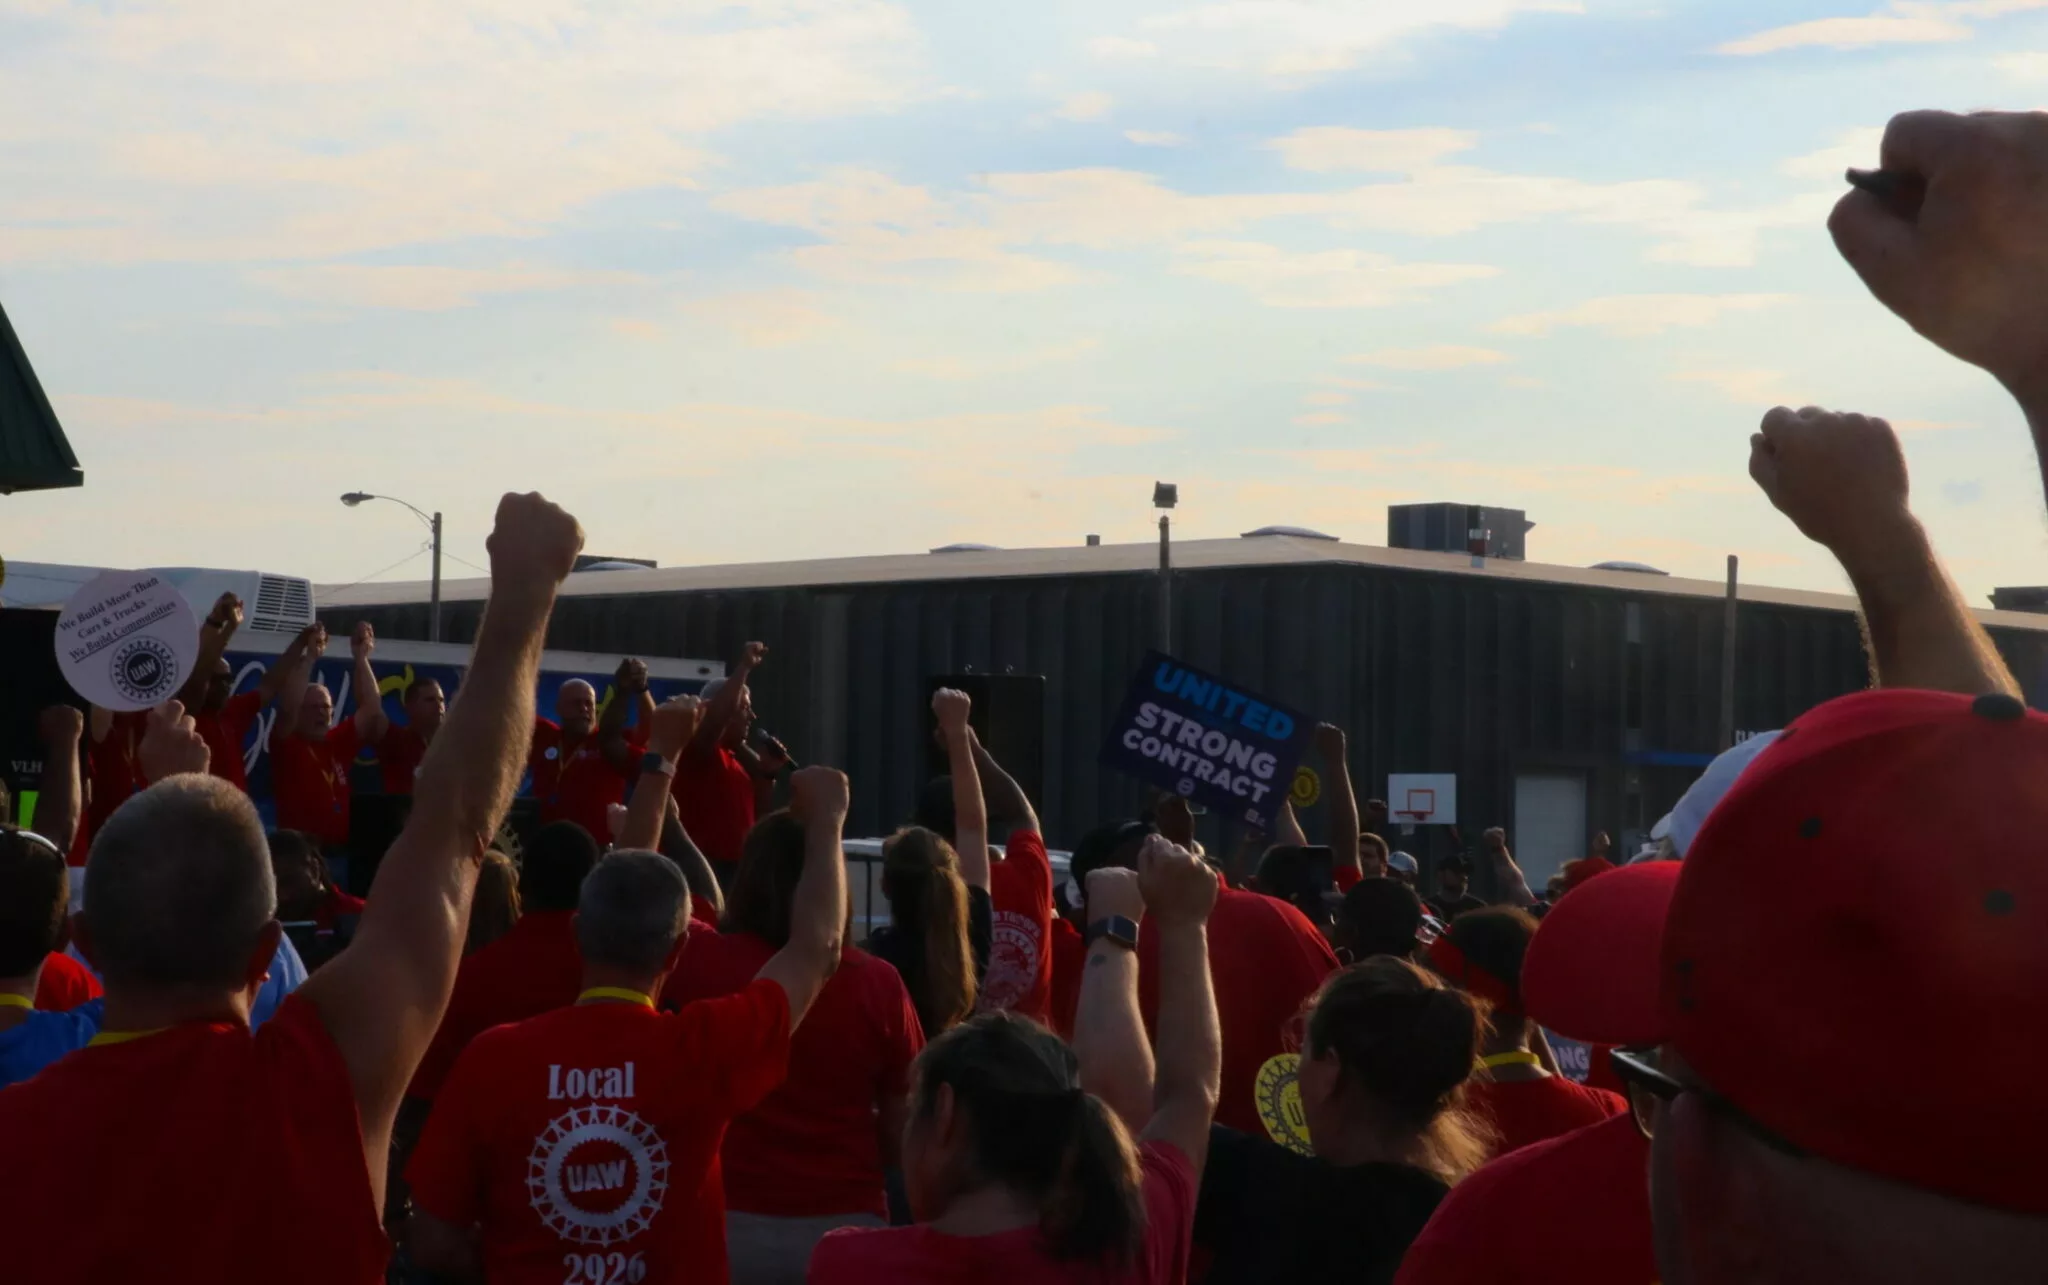 The UAW strikes are working, and now Kentuckians are joining in